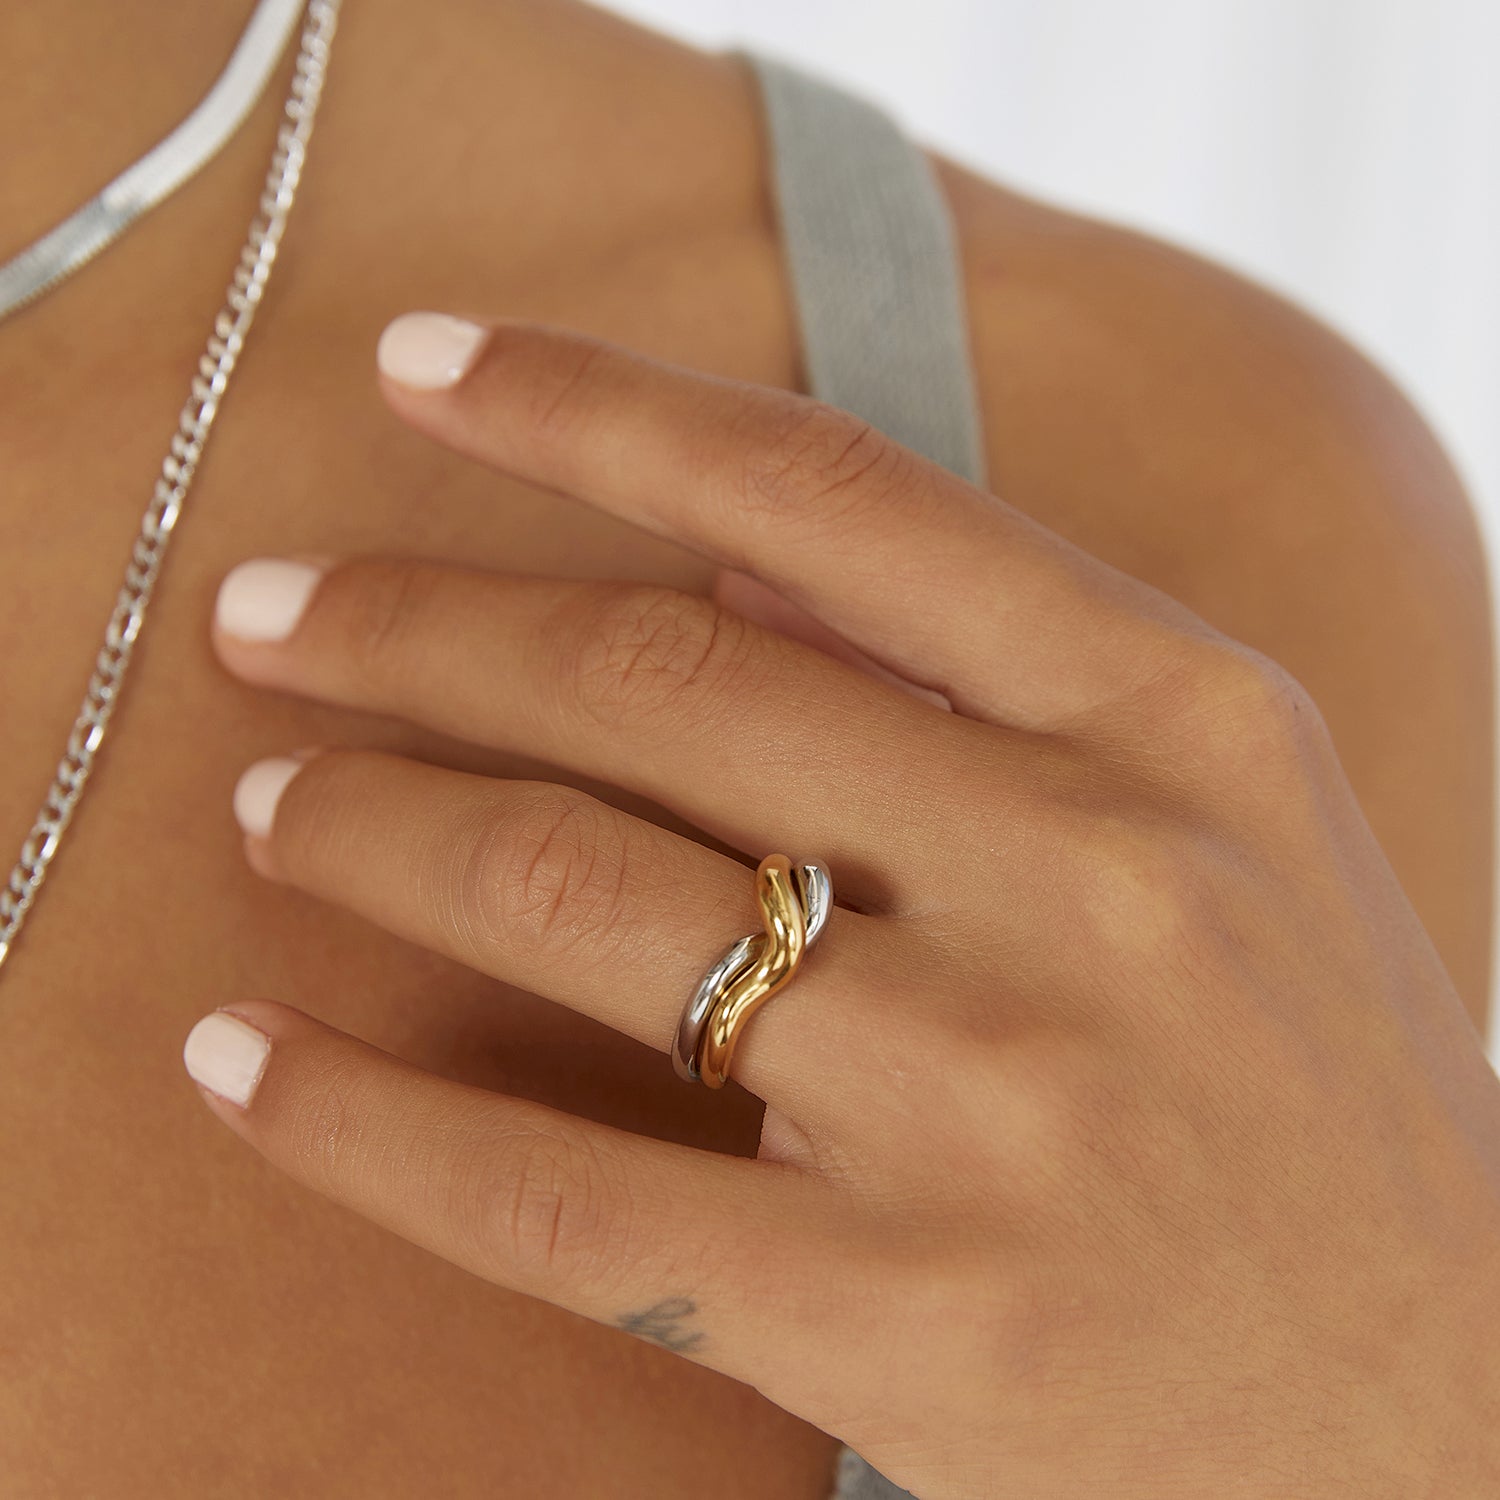 Arms Of Eve Simi two-tone ring in elegant gold and silver with an interlocking, undulating design